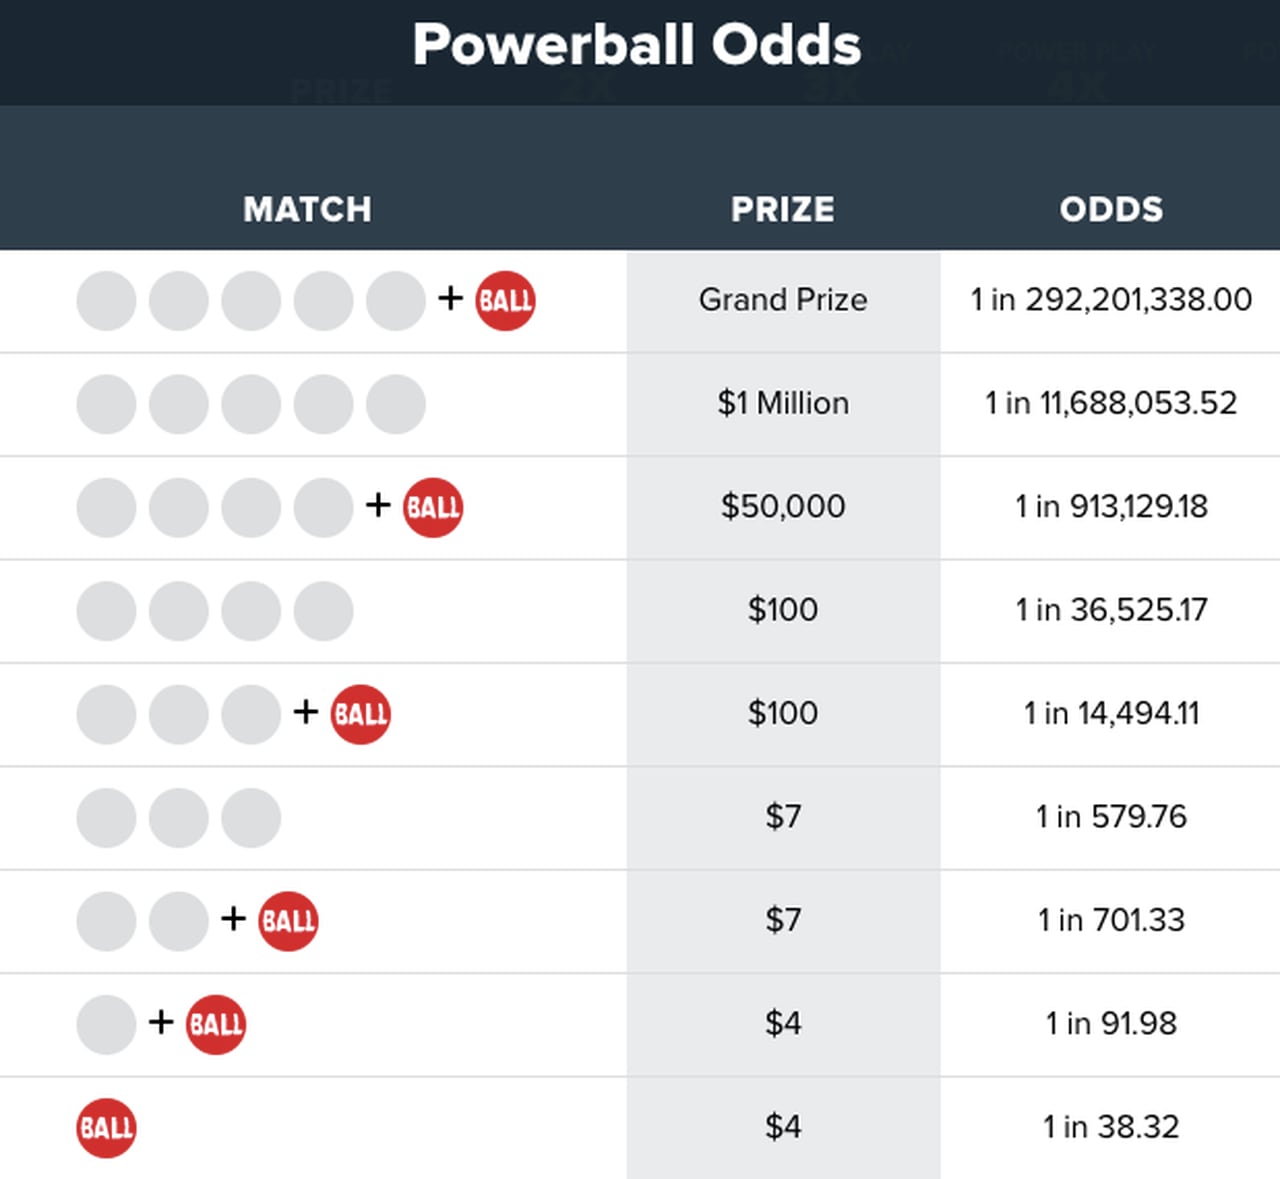 If you buy 45 powerball tickets, what is your odds of winning